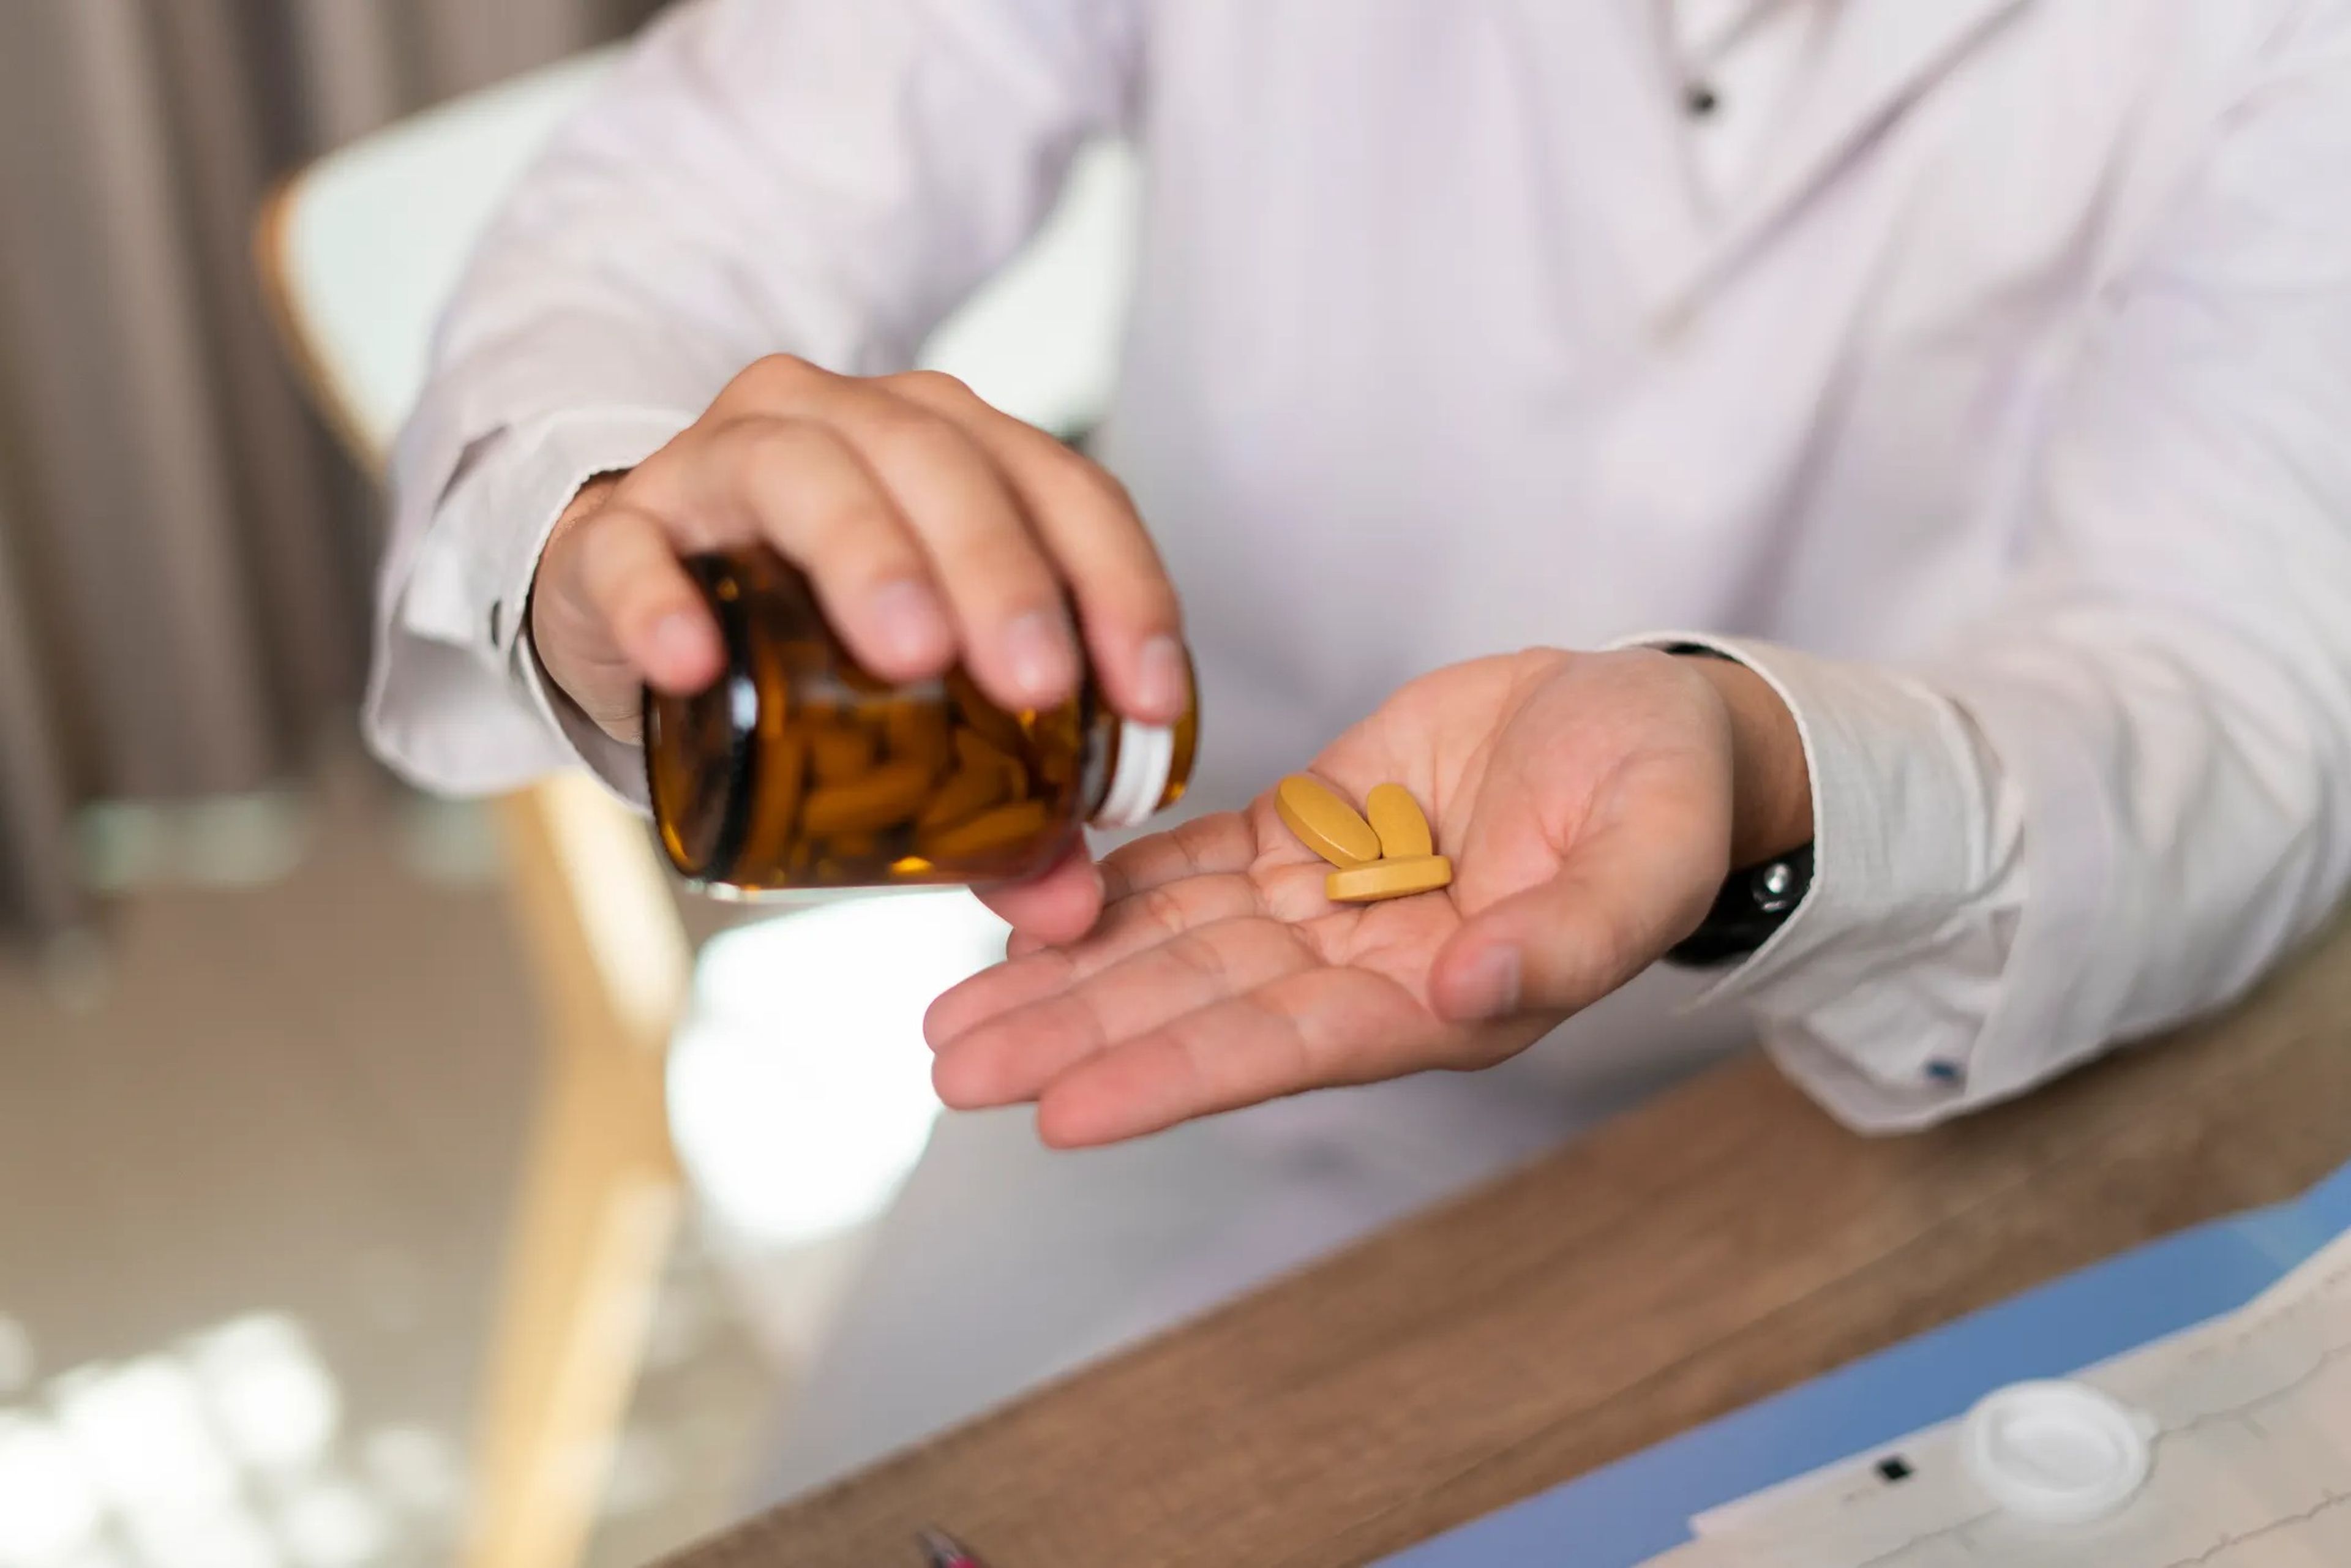 A man in a white lab coat pours yellow pills into his hand.